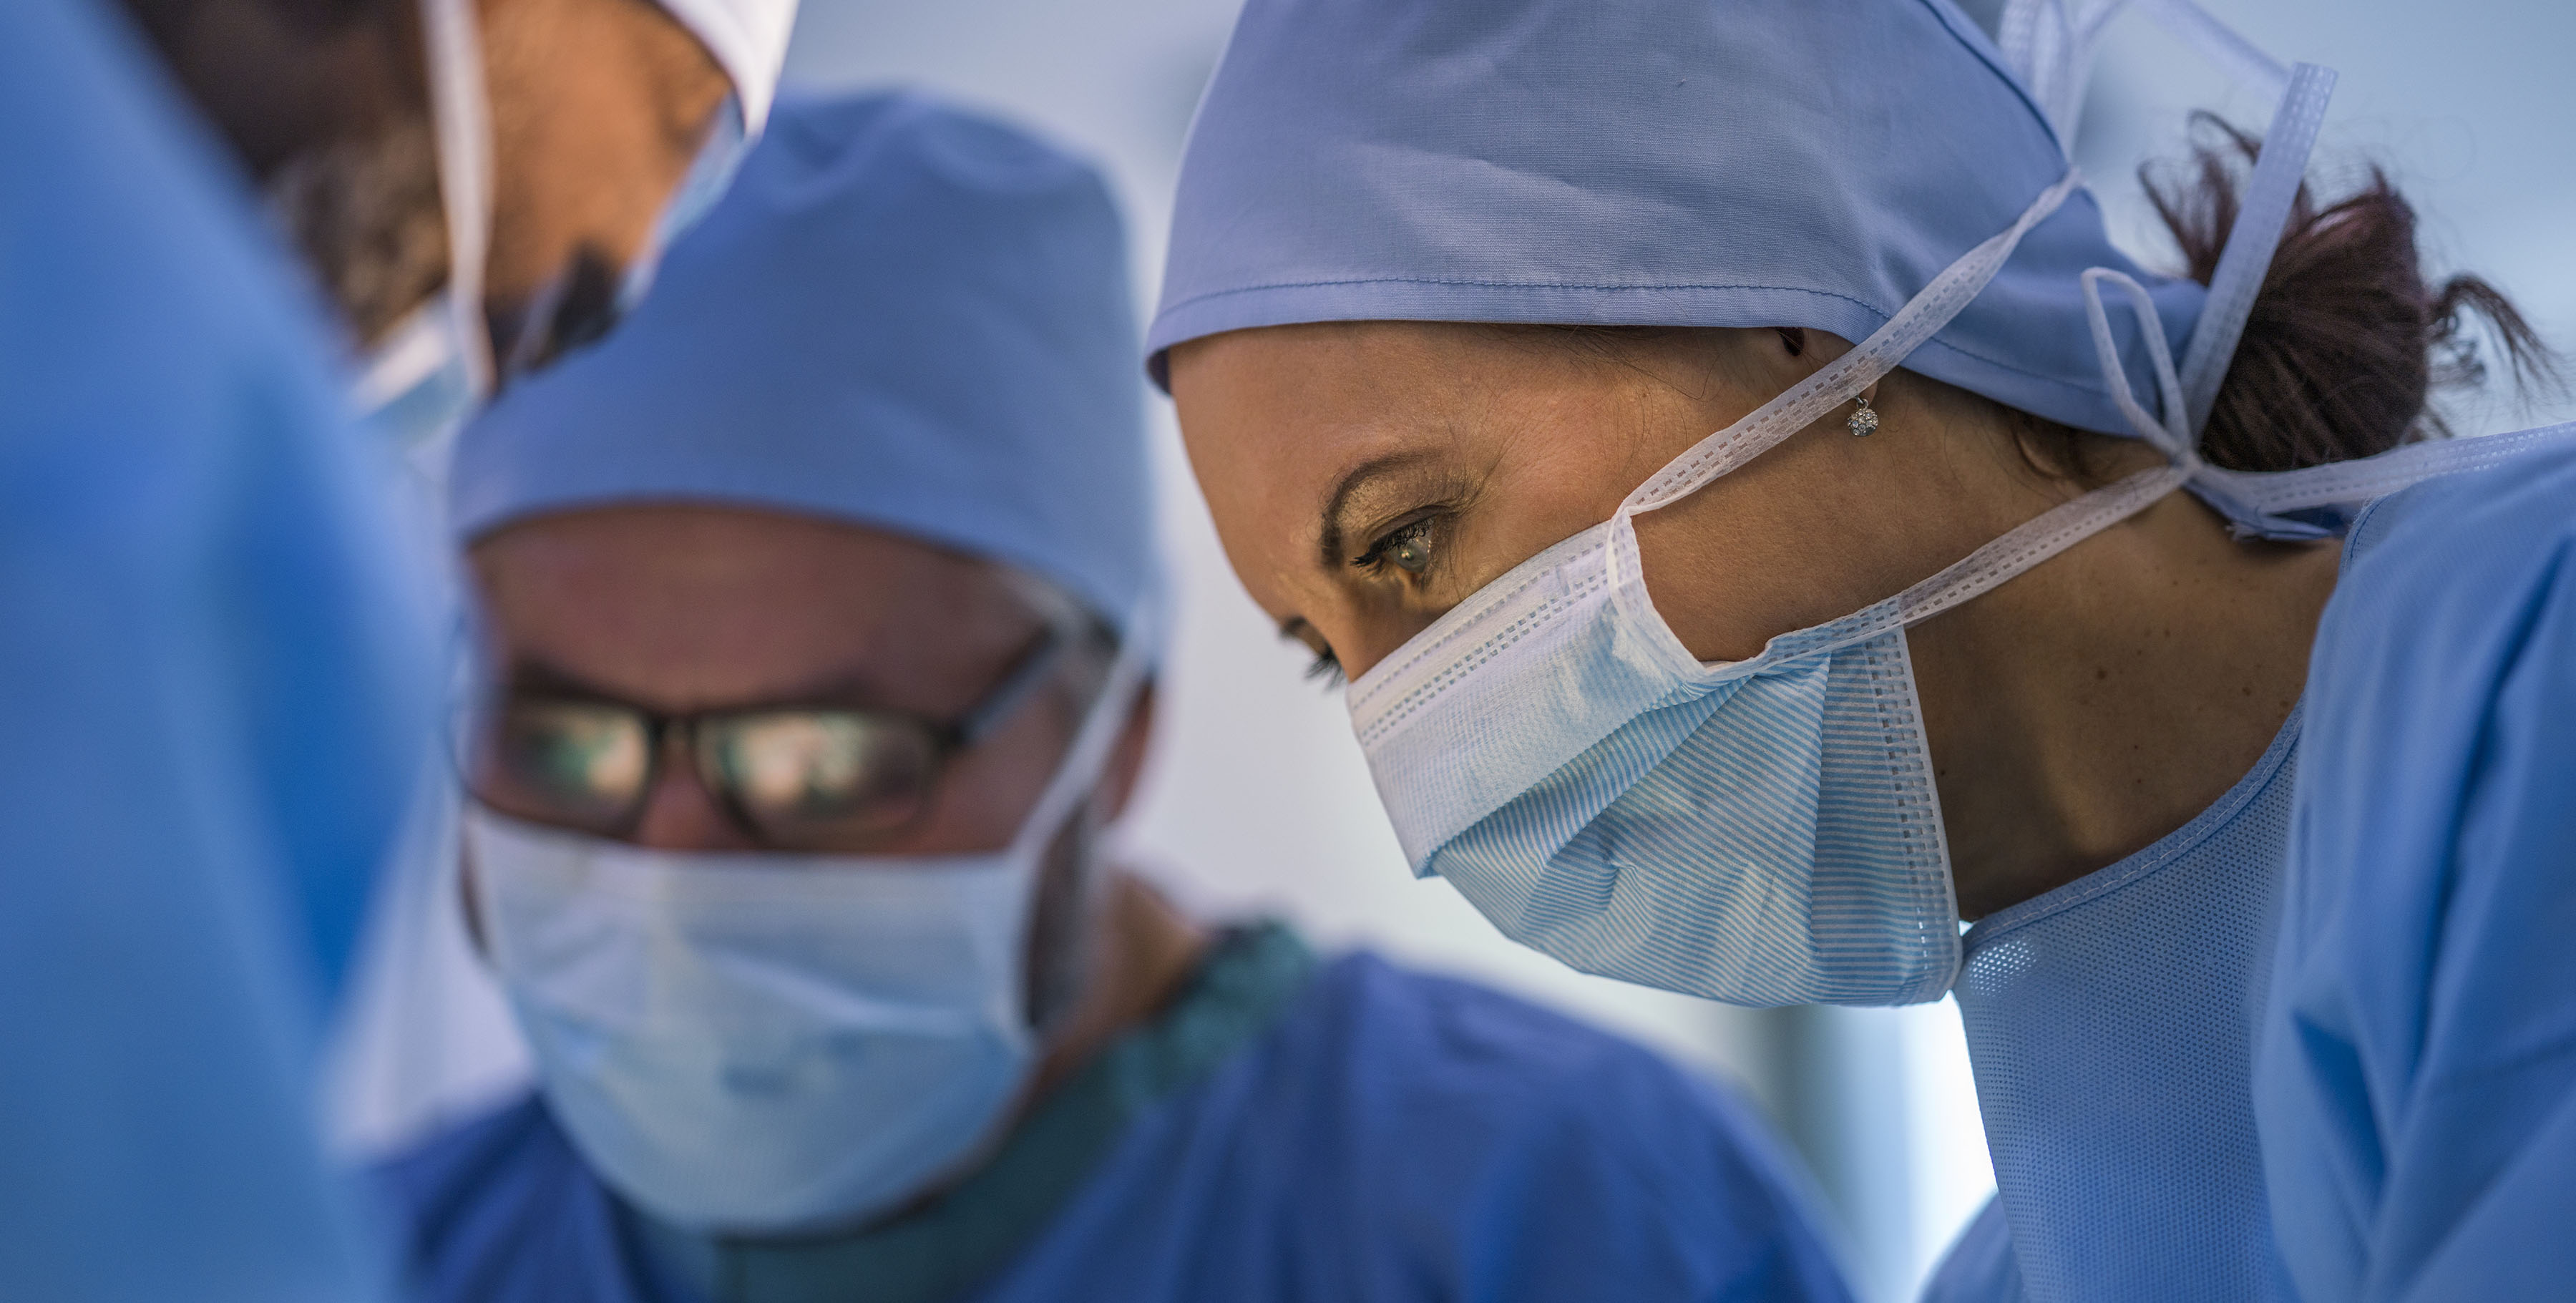 A woman in a surgical mask in the foreground, with men out of focus in the background.